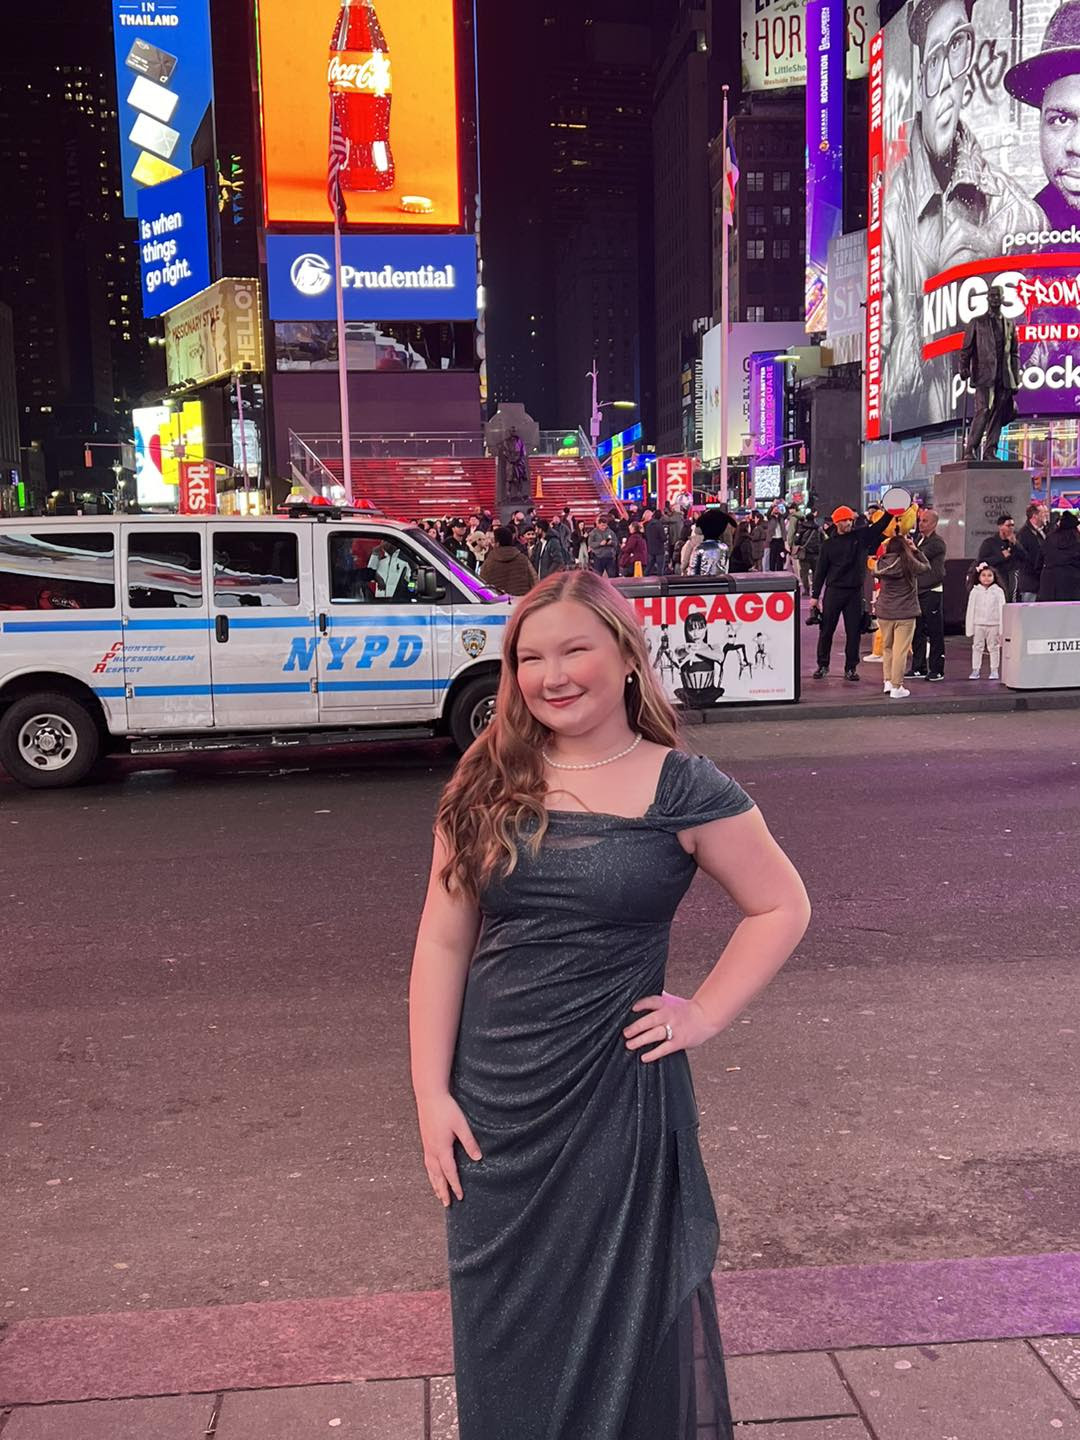 Department of Music student and singer Ellie “Paukana” Martinson in New York City ready for her performance at Carnegie Hall